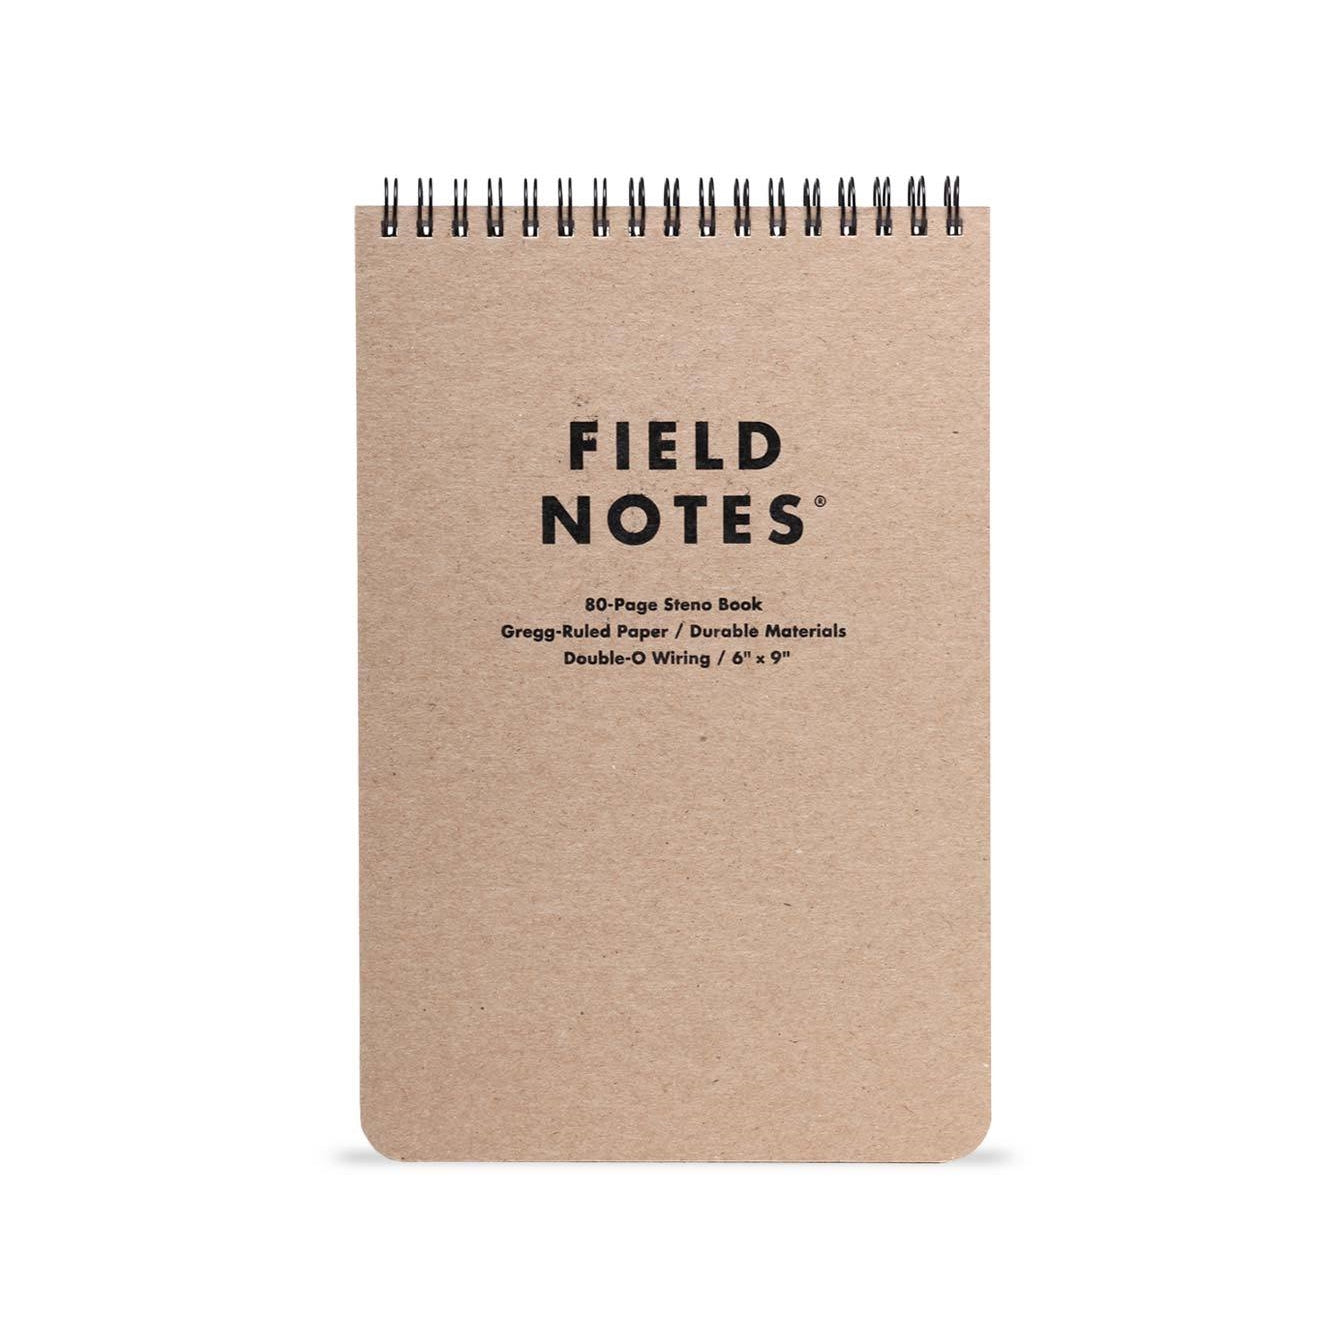 FIELD NOTES 80-pg Steno Book 6"x9" Default Title